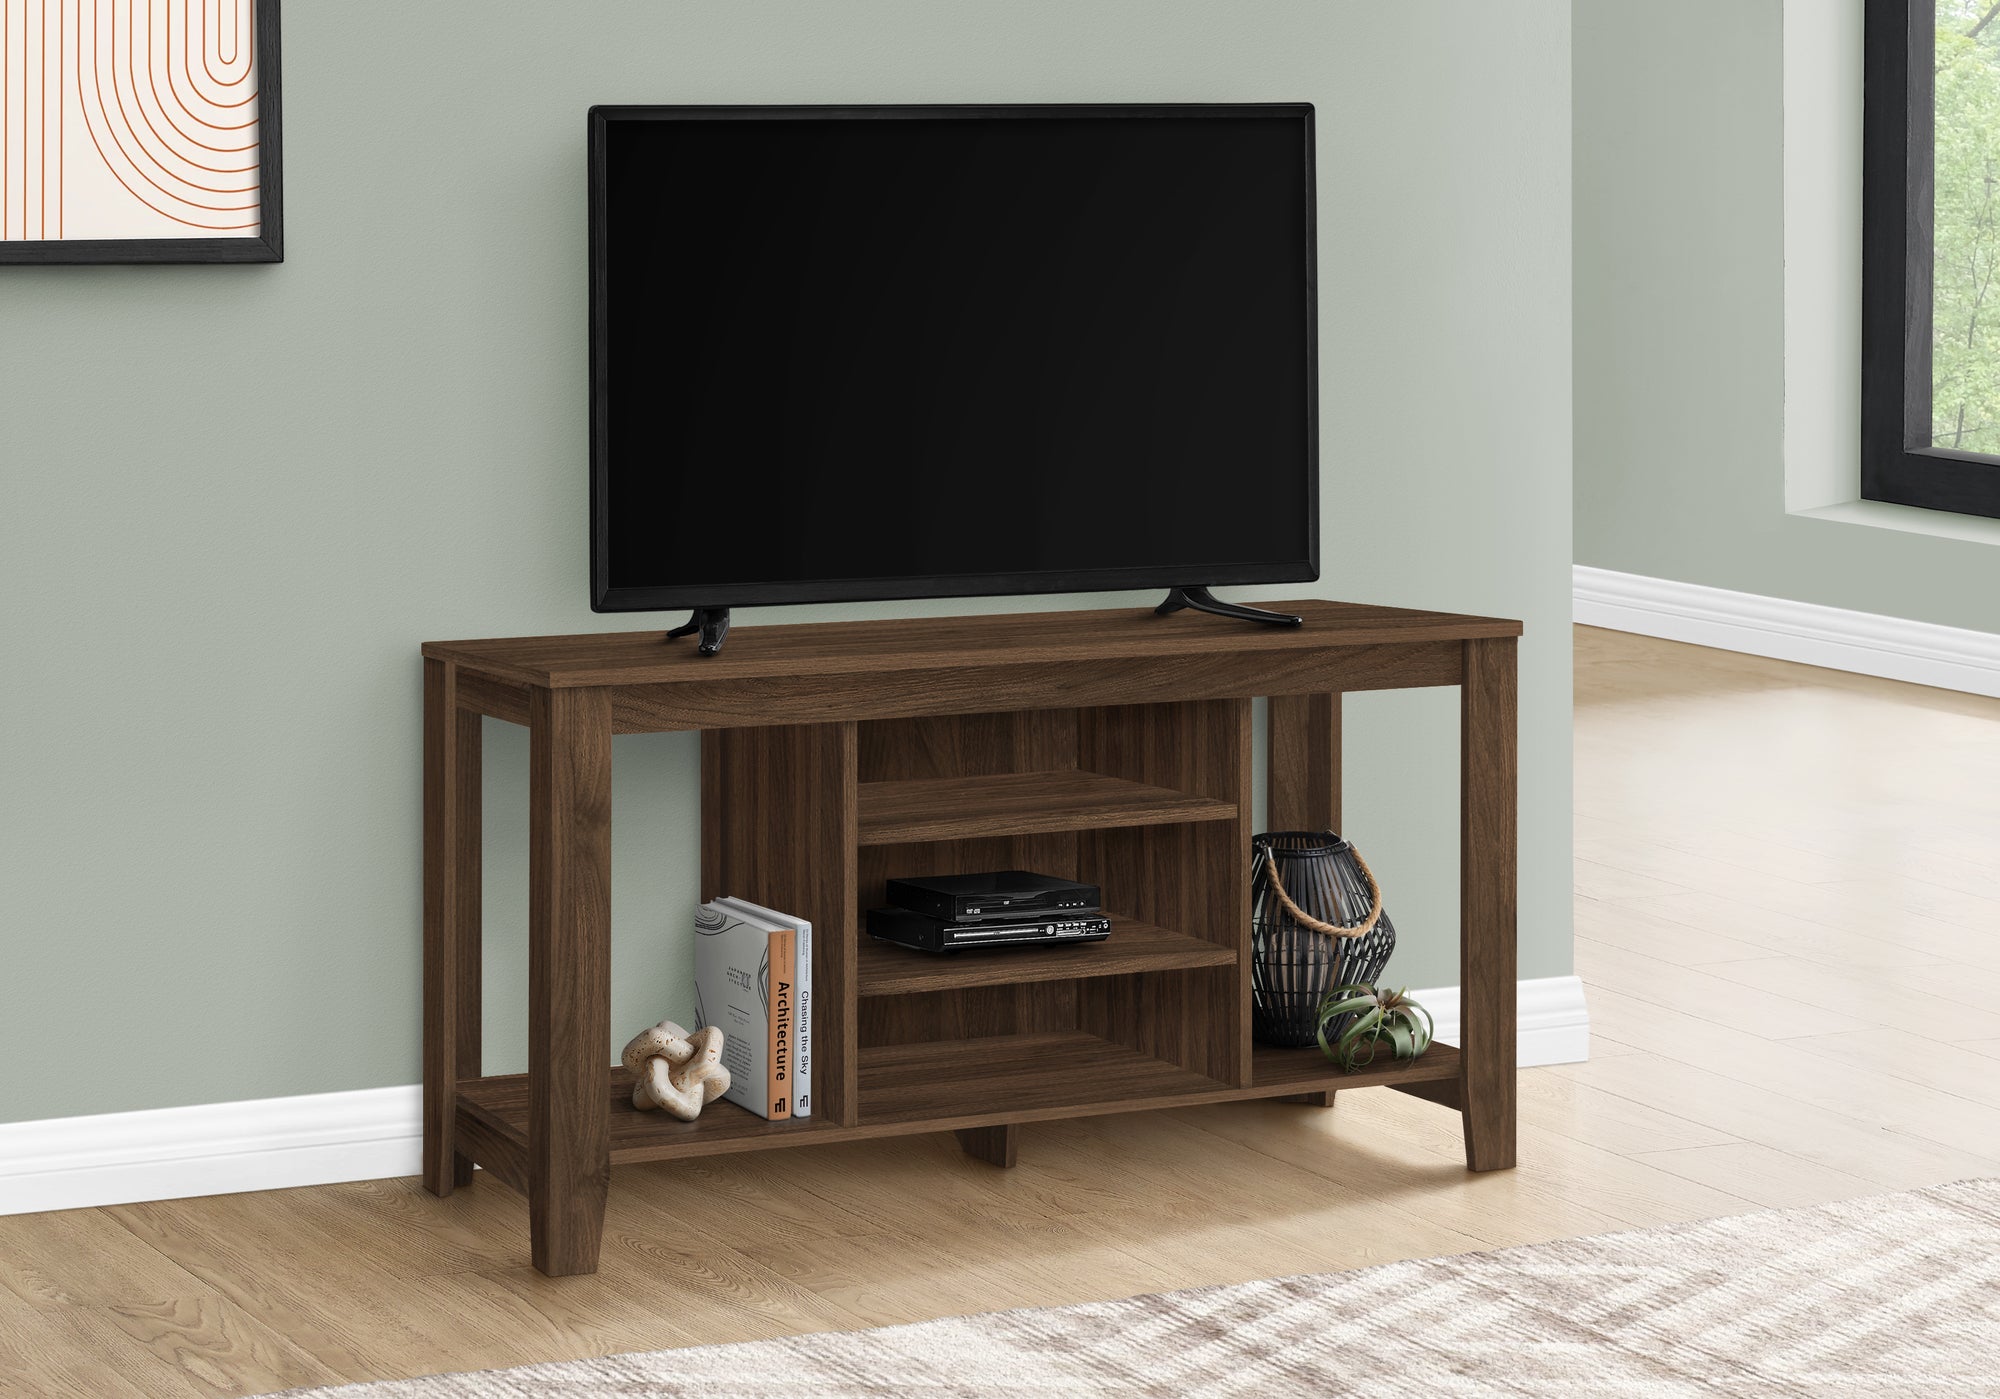 MN-343566    Tv Stand, 48 Inch, Console, Media Entertainment Center, Storage Cabinet, Living Room, Bedroom, Laminate, Walnut, Contemporary, Modern